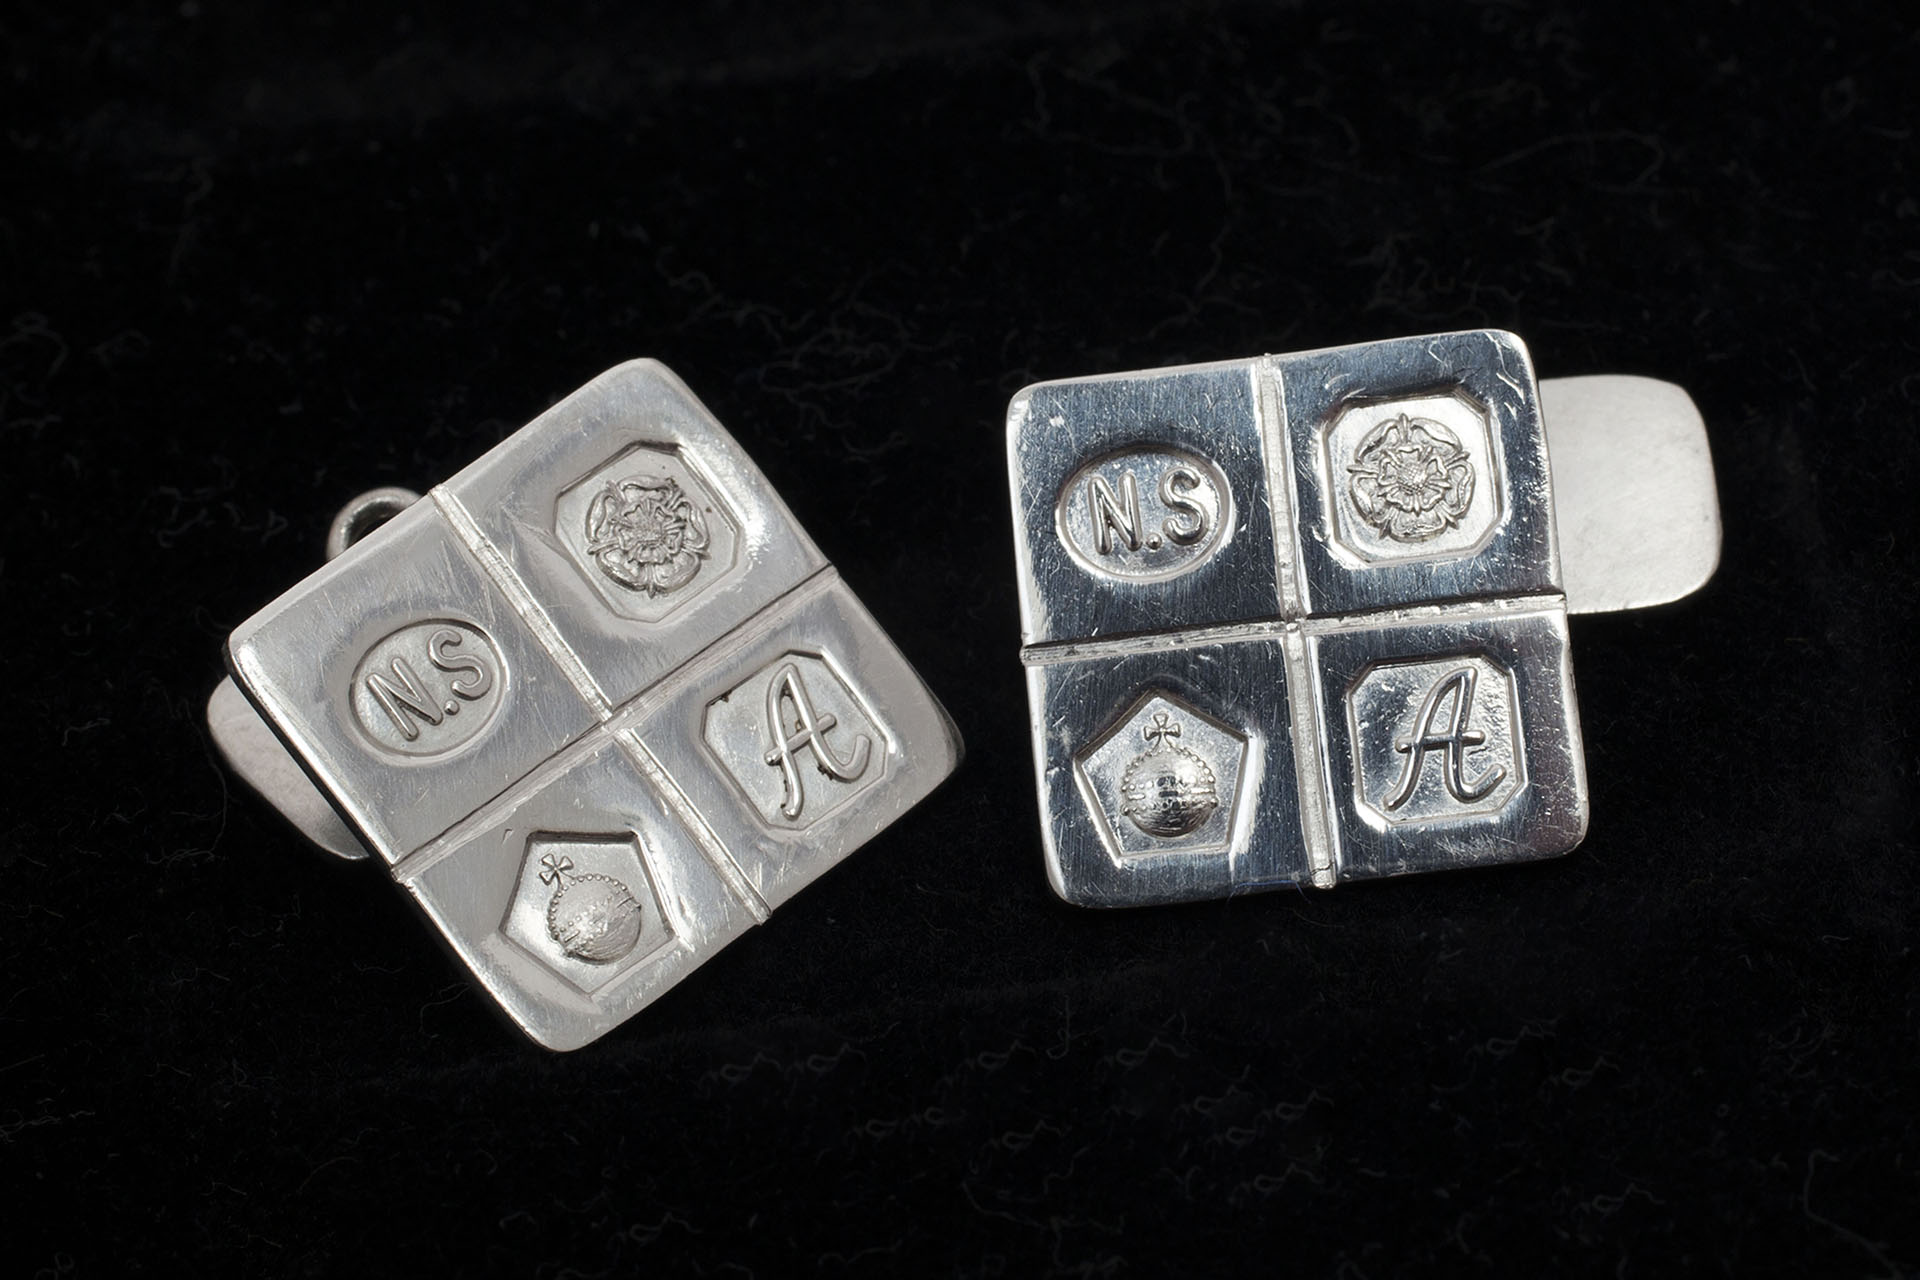 A pair of silver square cufflinks embossed with 4 symbols - the letters N.S, a flower, an orb and the letter A.  